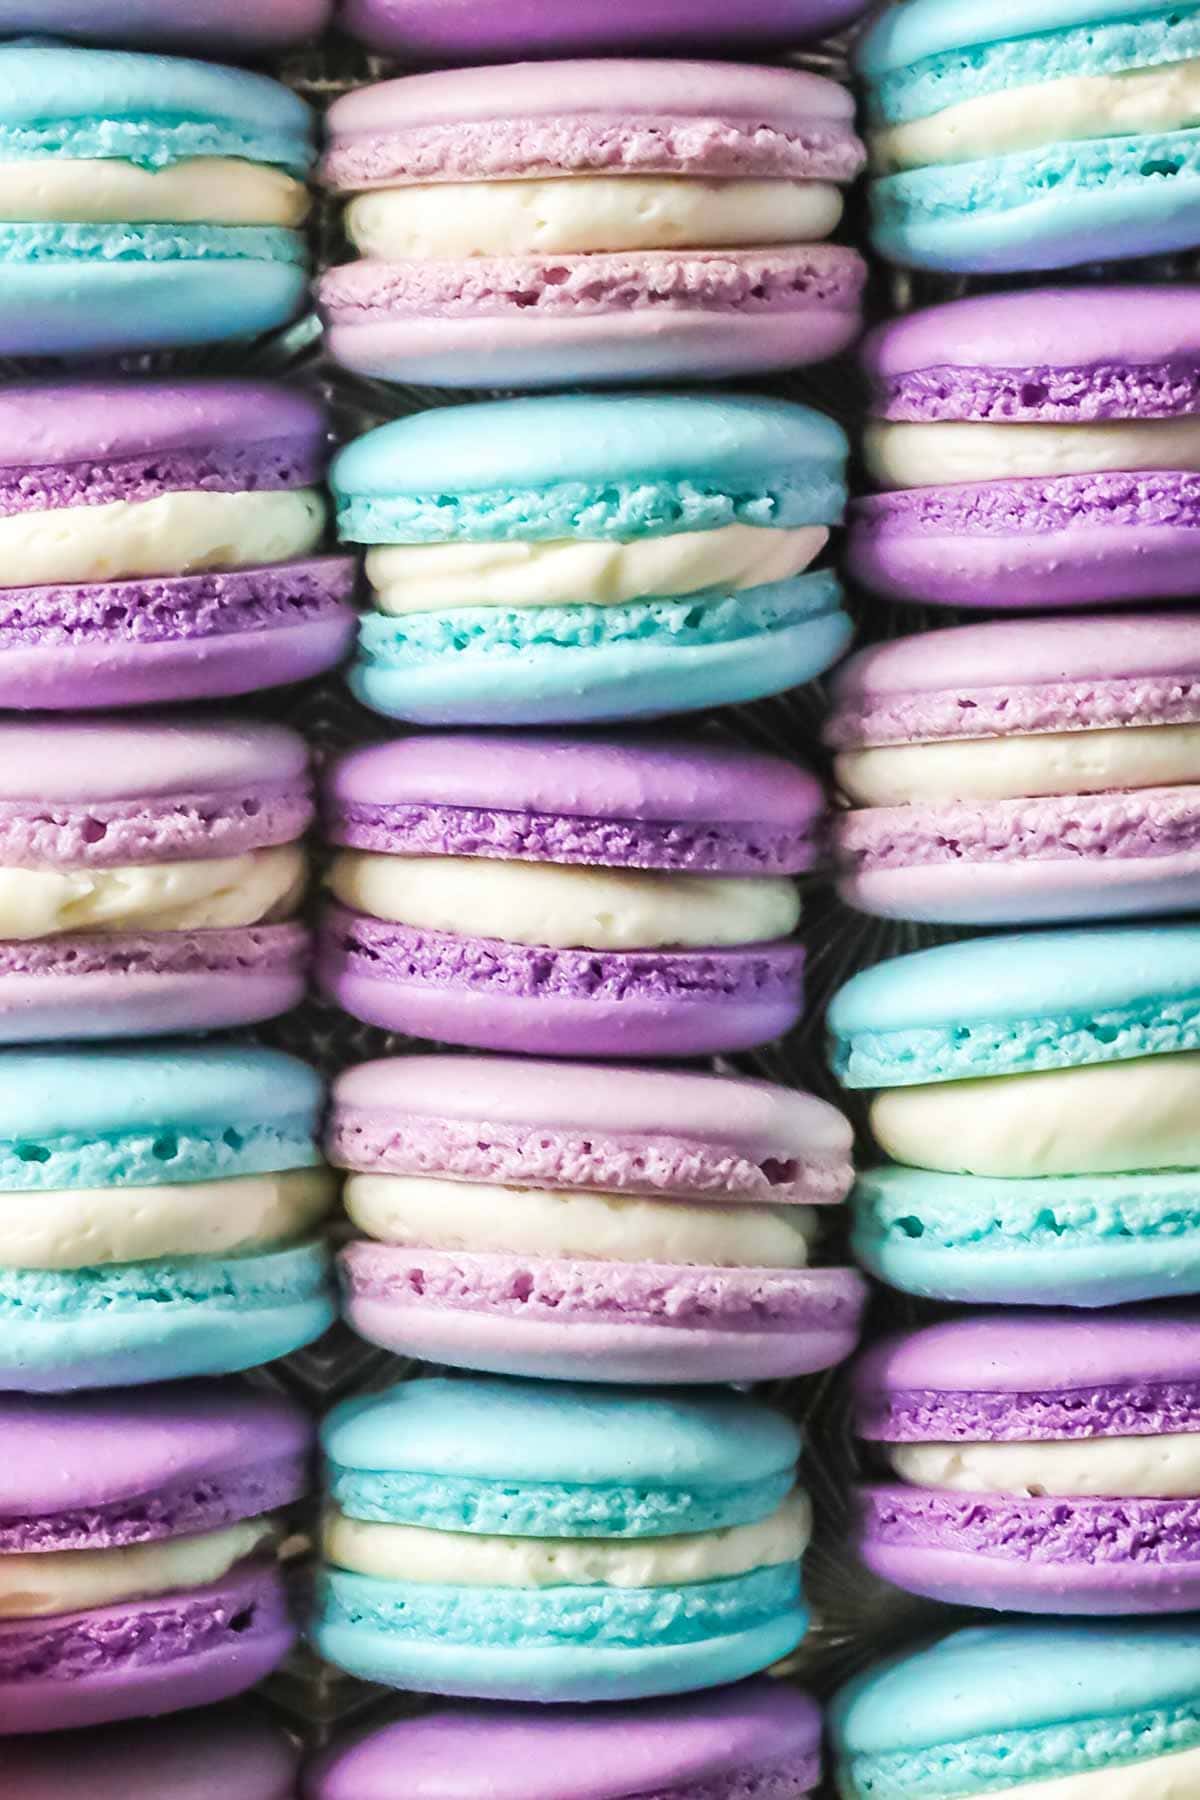 French macaron recipe showing side view of bright blue, light purple, and dark purple macarons sandwiches with white filling, all arranged in neat rows